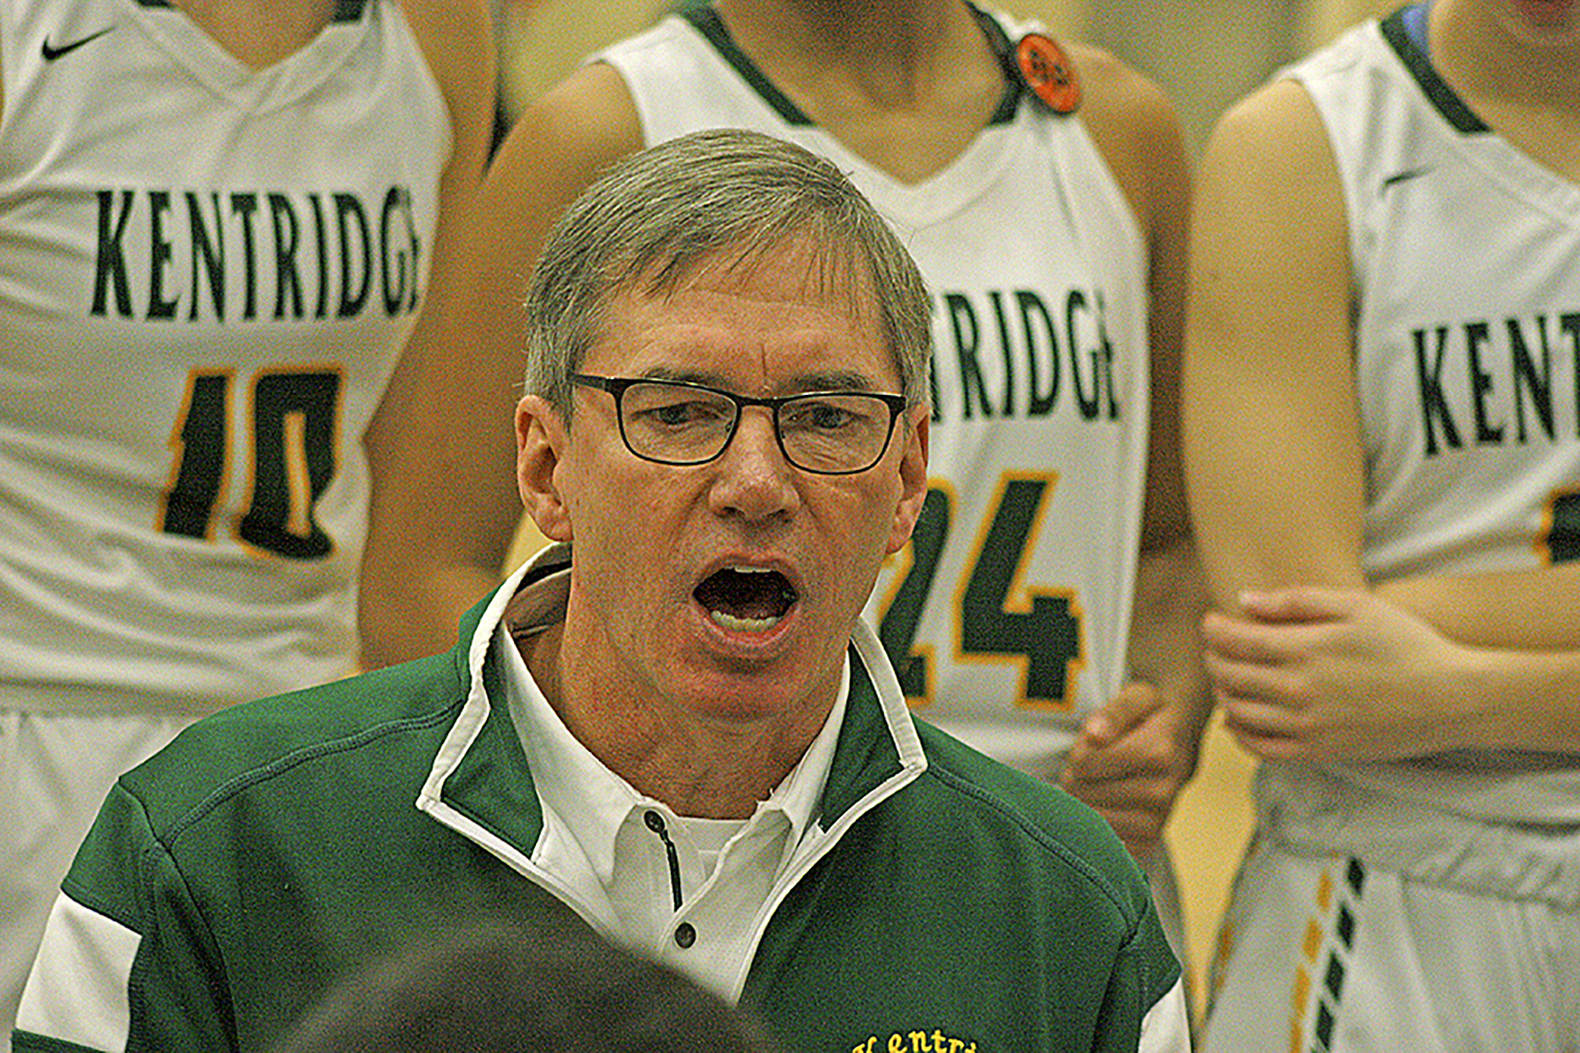 Kentridge coach Bob Sandall delivers instructions to his team during a timeout. MARK KLAAS, Kent Reporter